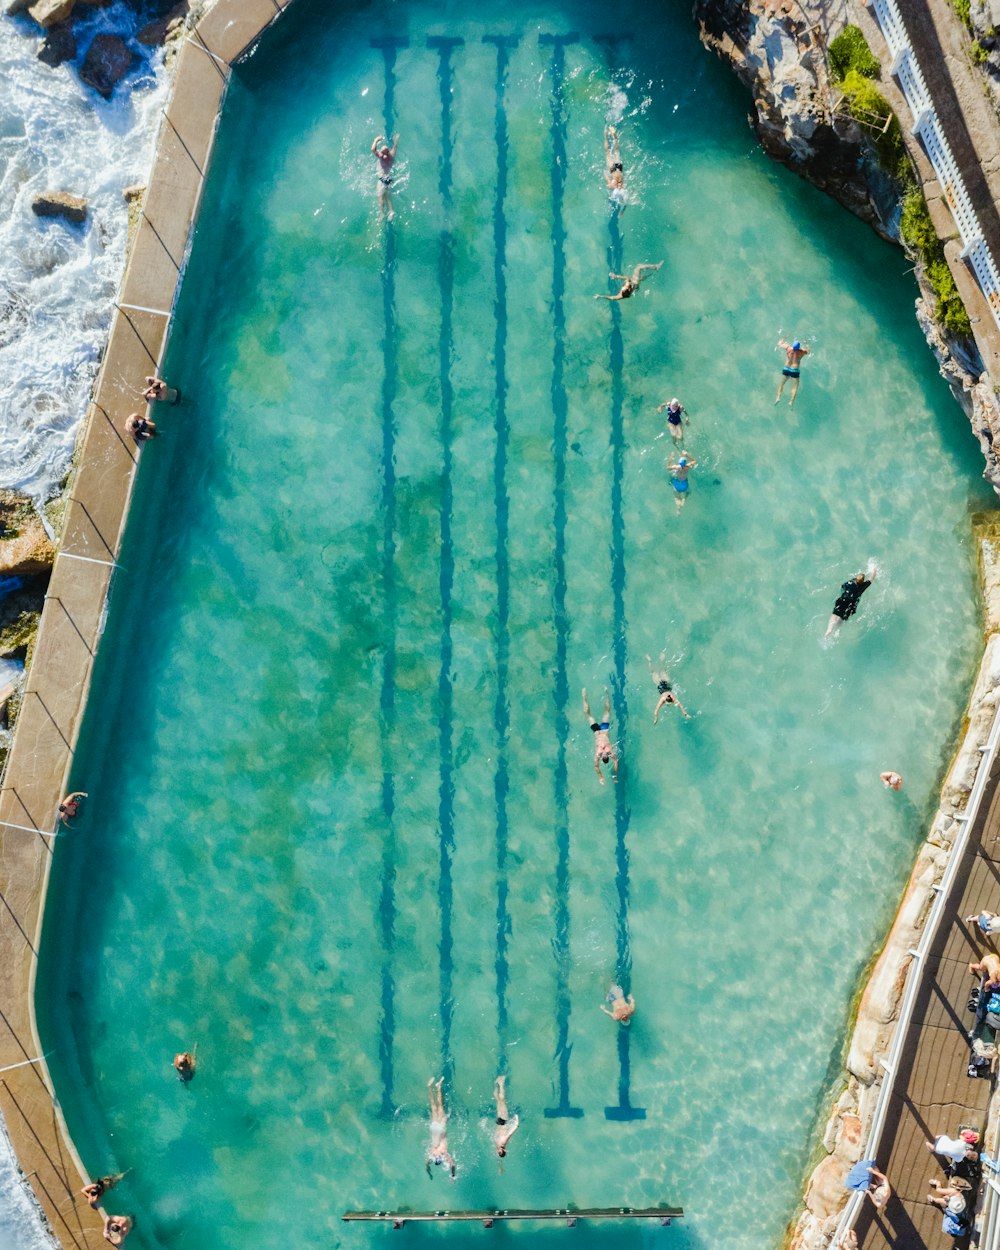 people swimming in pool during daytime